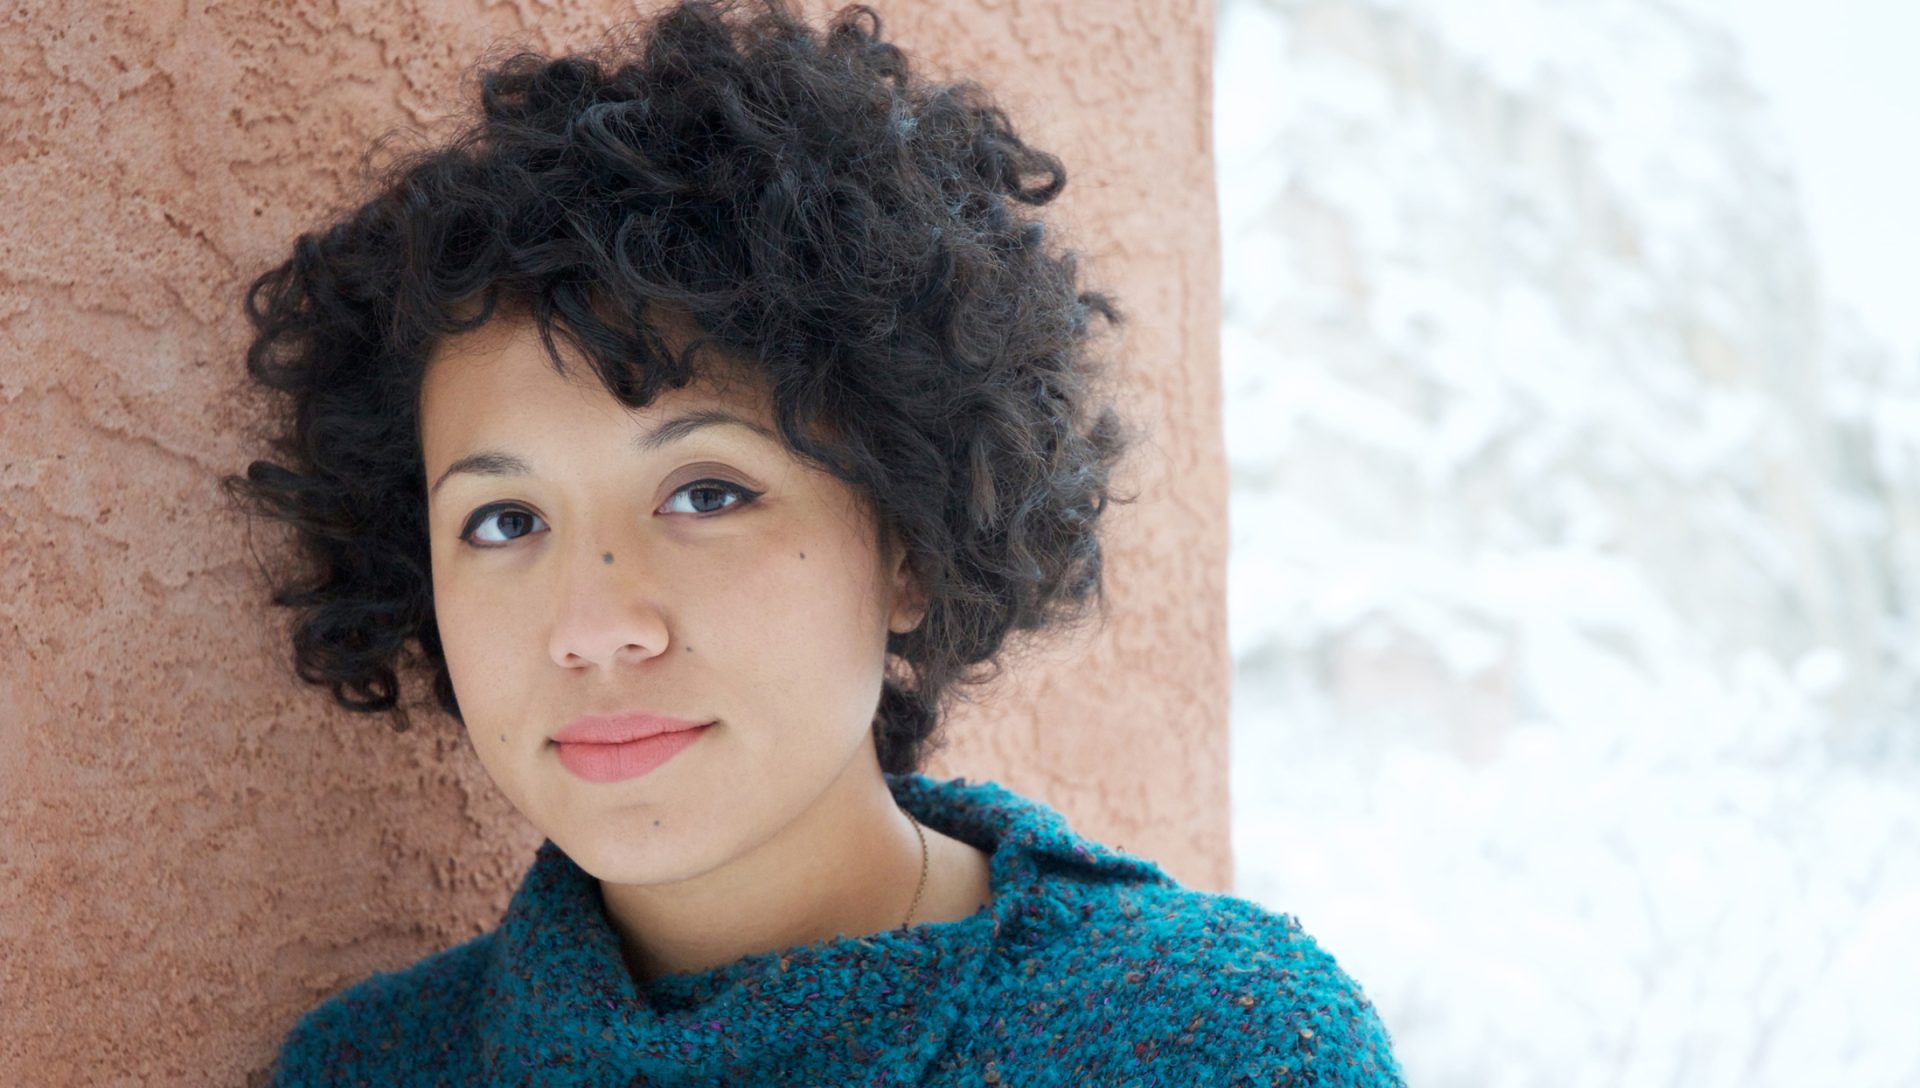 a women with short curly hair is smiling at the camera, she is leaning against a wall.